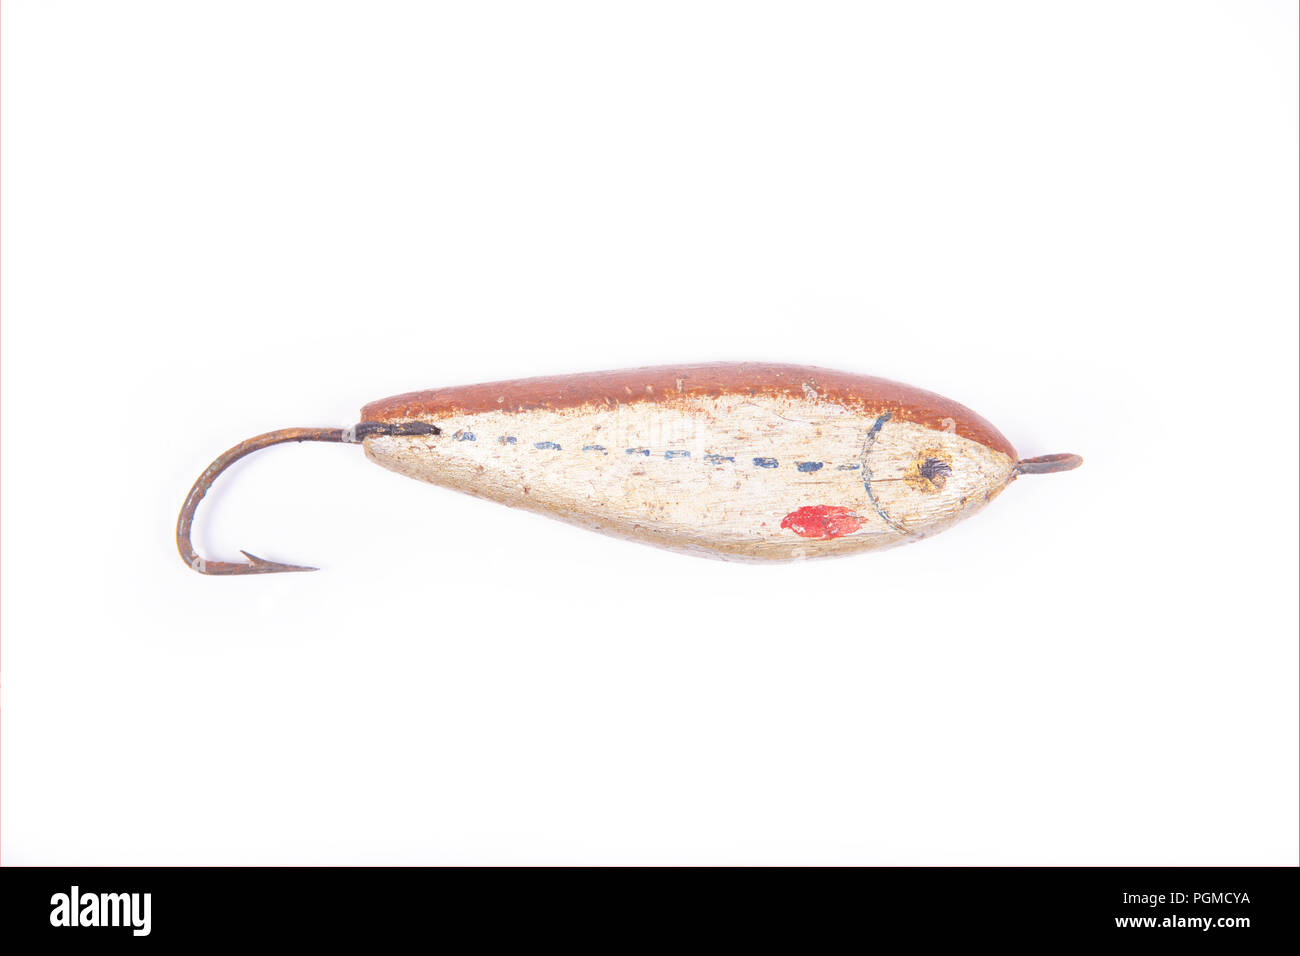 A homemade wooden fiishing lure designed for catching predatory fish. From a collection of vintage and modern fishing tackle. North Dorset England UK  Stock Photo